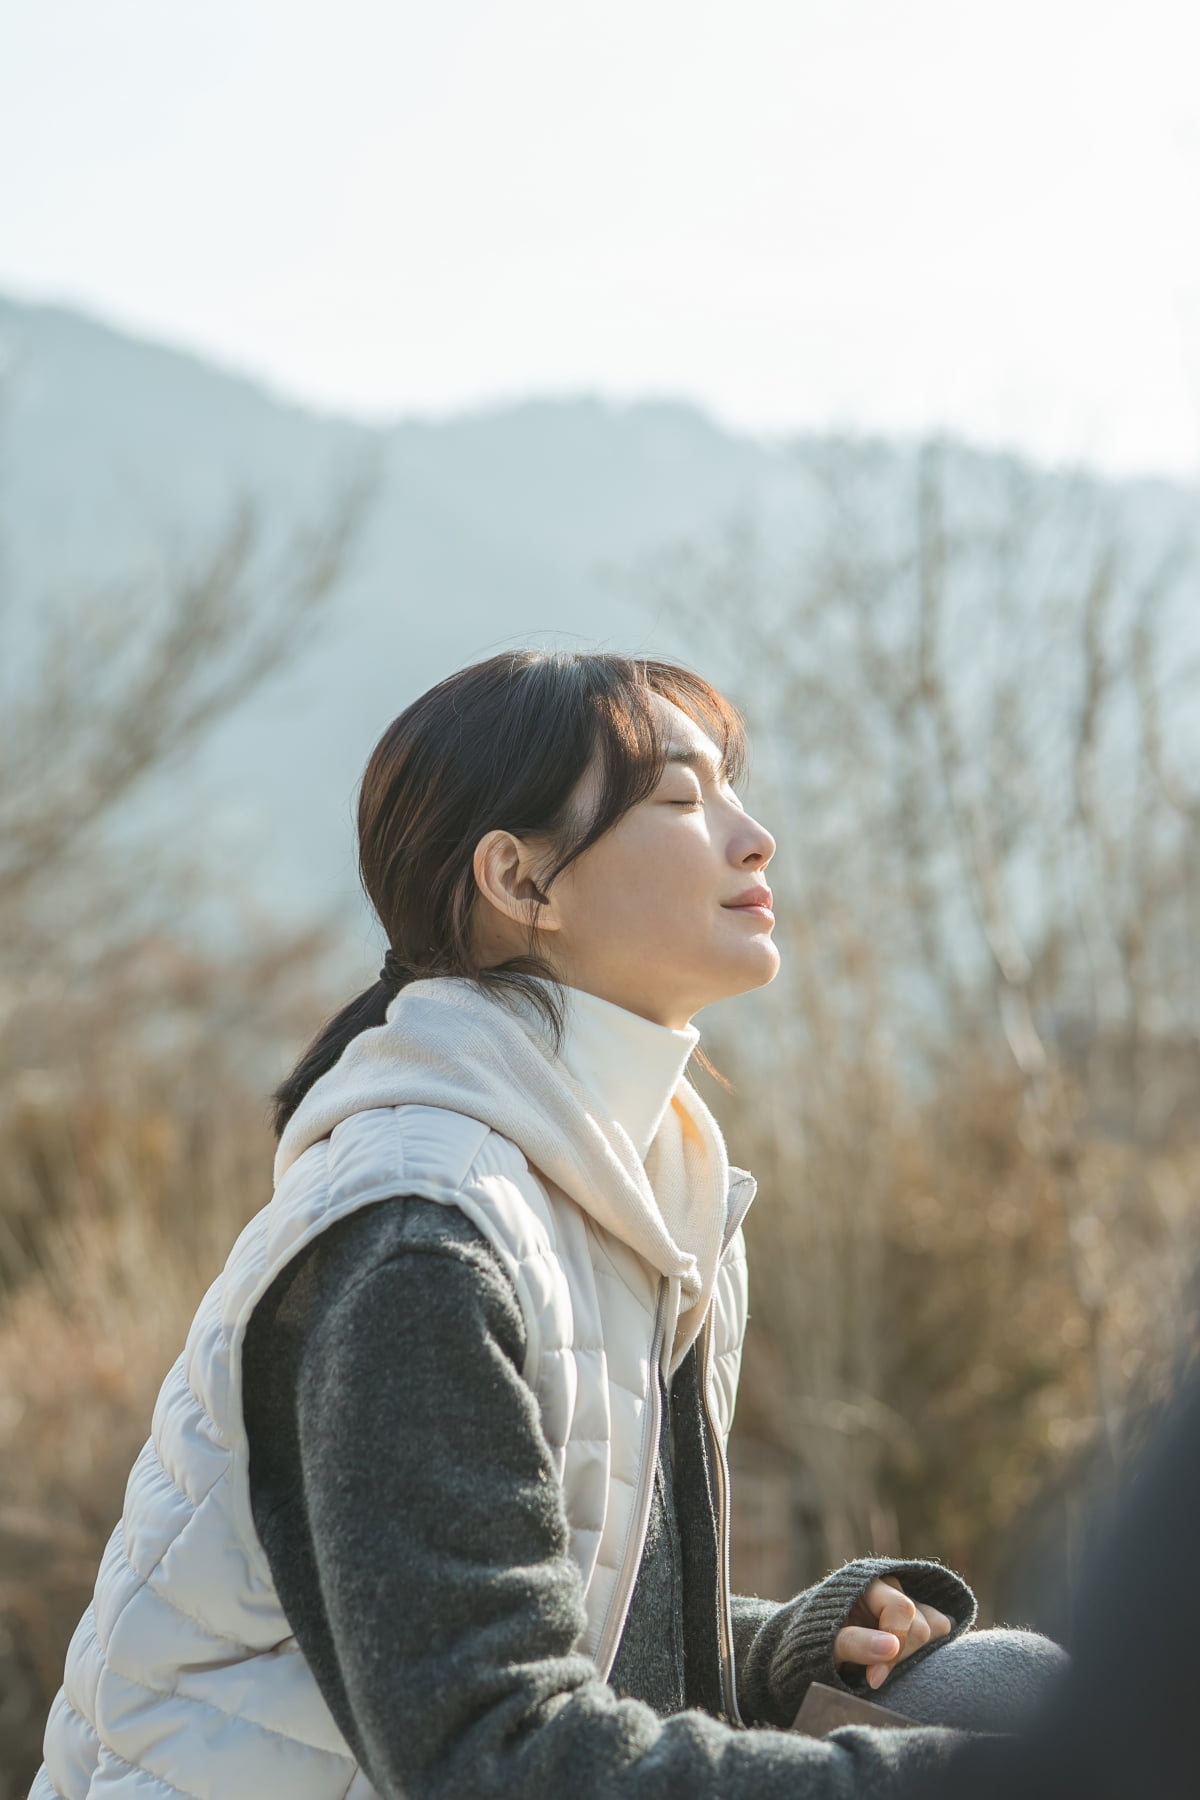 The movie ‘3 Days of Vacation’, a mother-daughter fantasy portrayed by Kim Hae-sook and Shin Min-ah